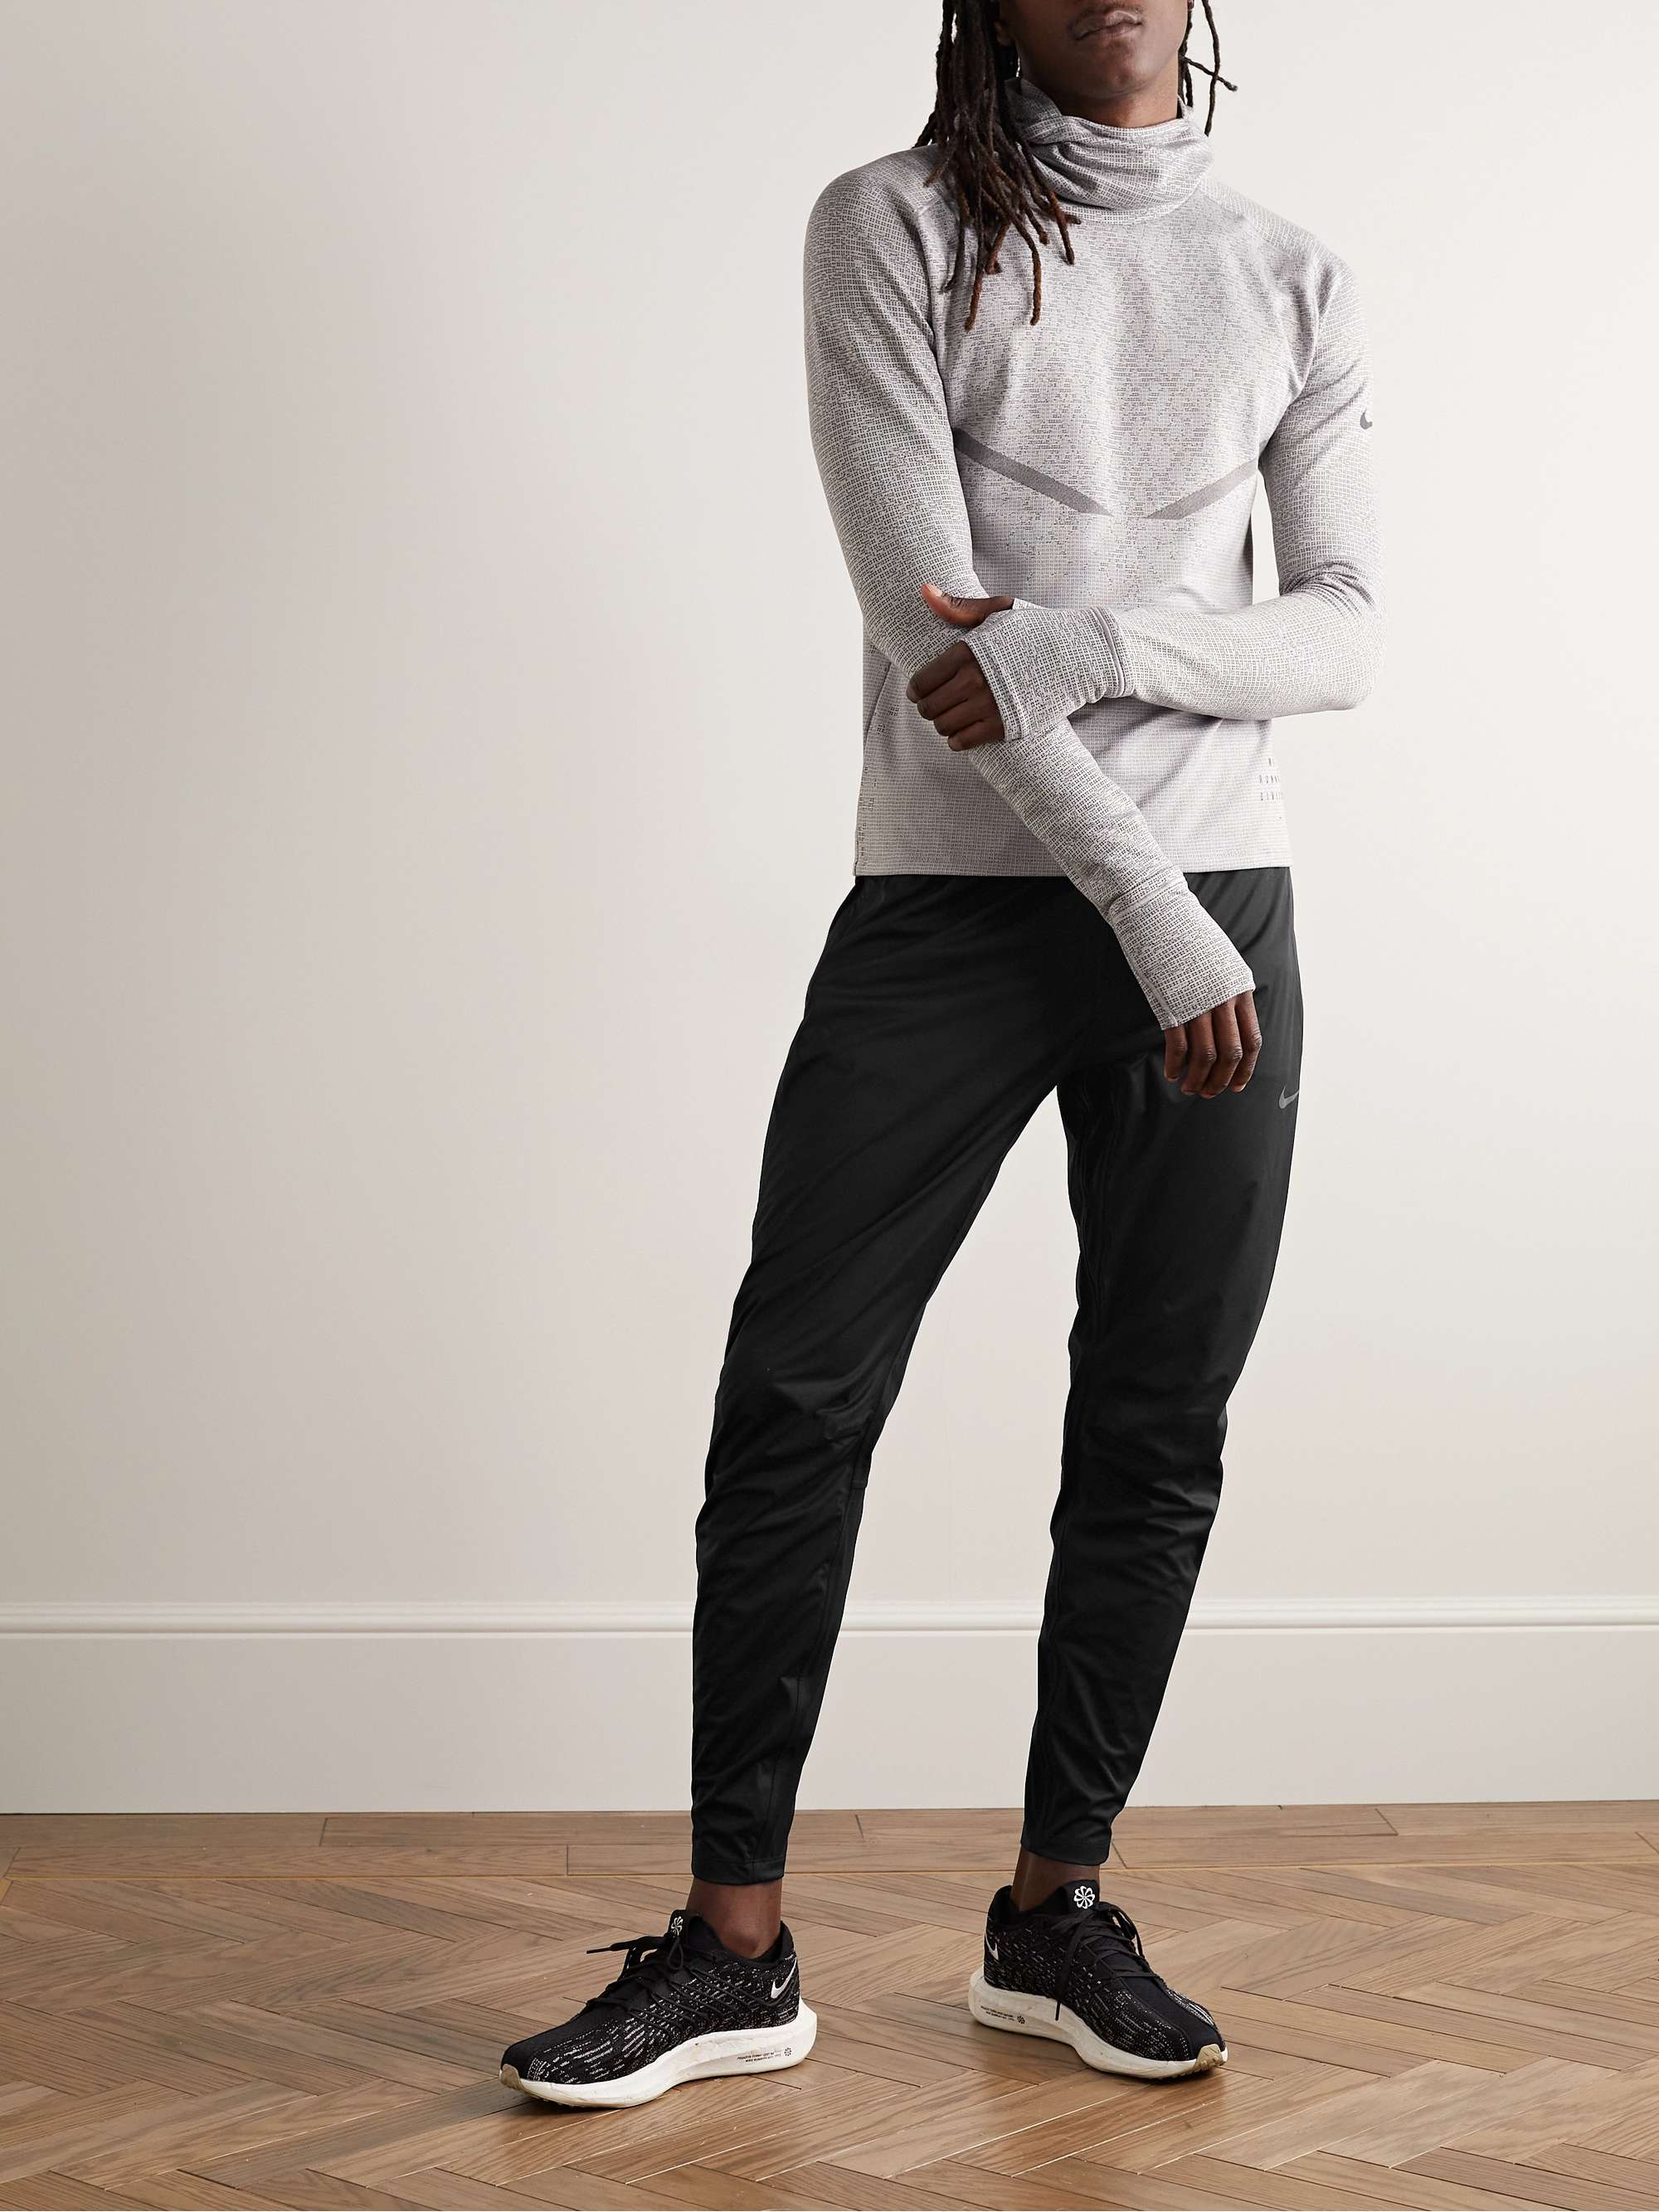 NIKE RUNNING Slim-Fit Tapered Storm-FIT ADV Track Pants | MR PORTER